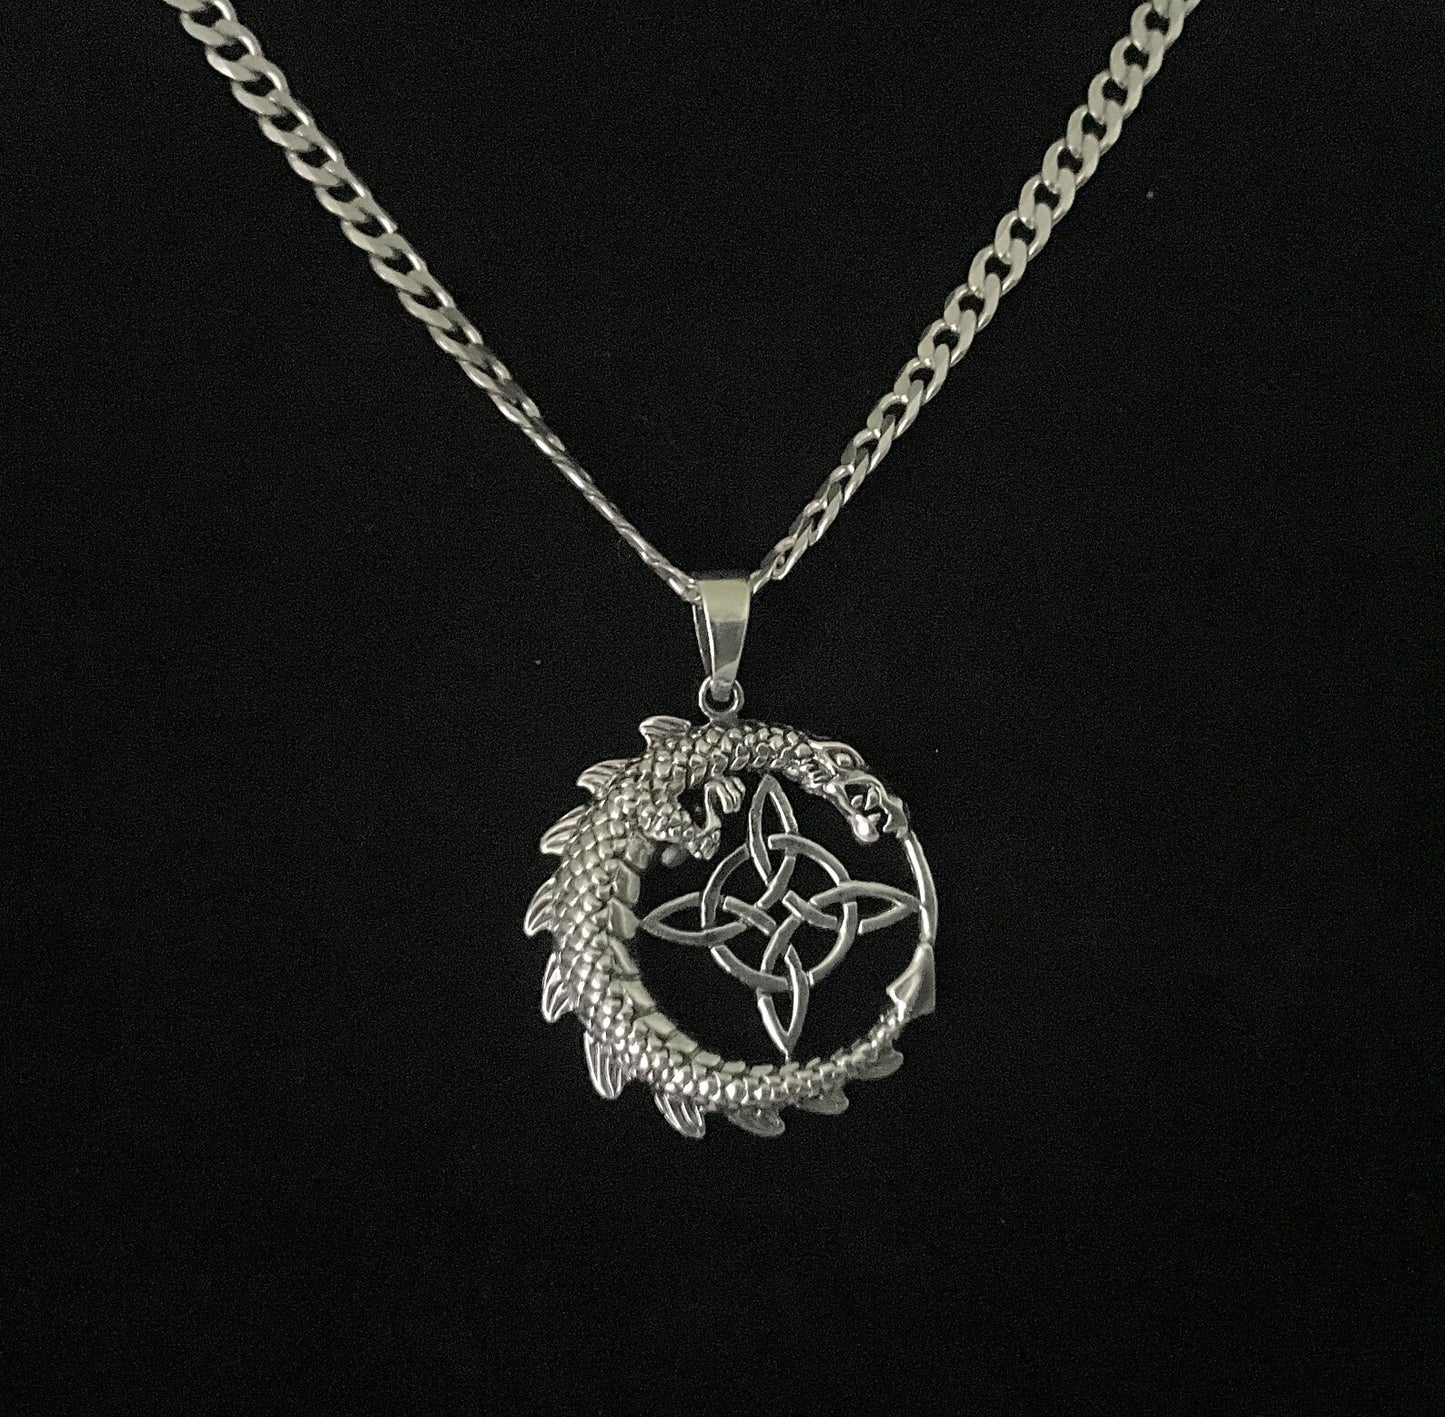 Large 925 Sterling Silver Medieval Dragon wrapped around Celtic Compass Pendant + Free Chain